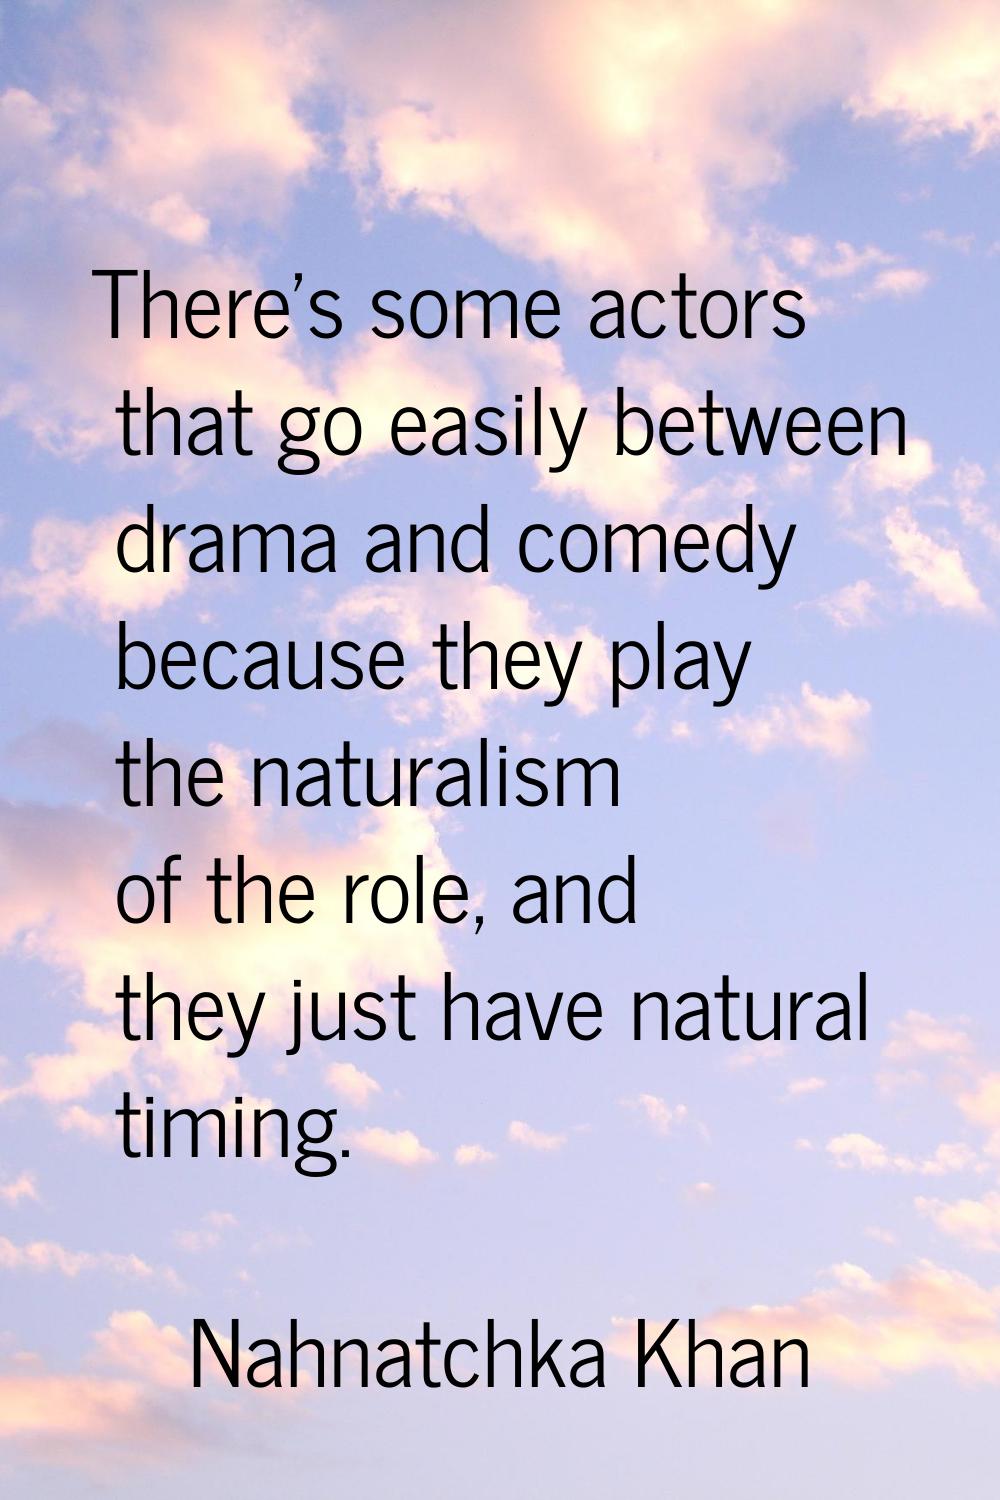 There's some actors that go easily between drama and comedy because they play the naturalism of the